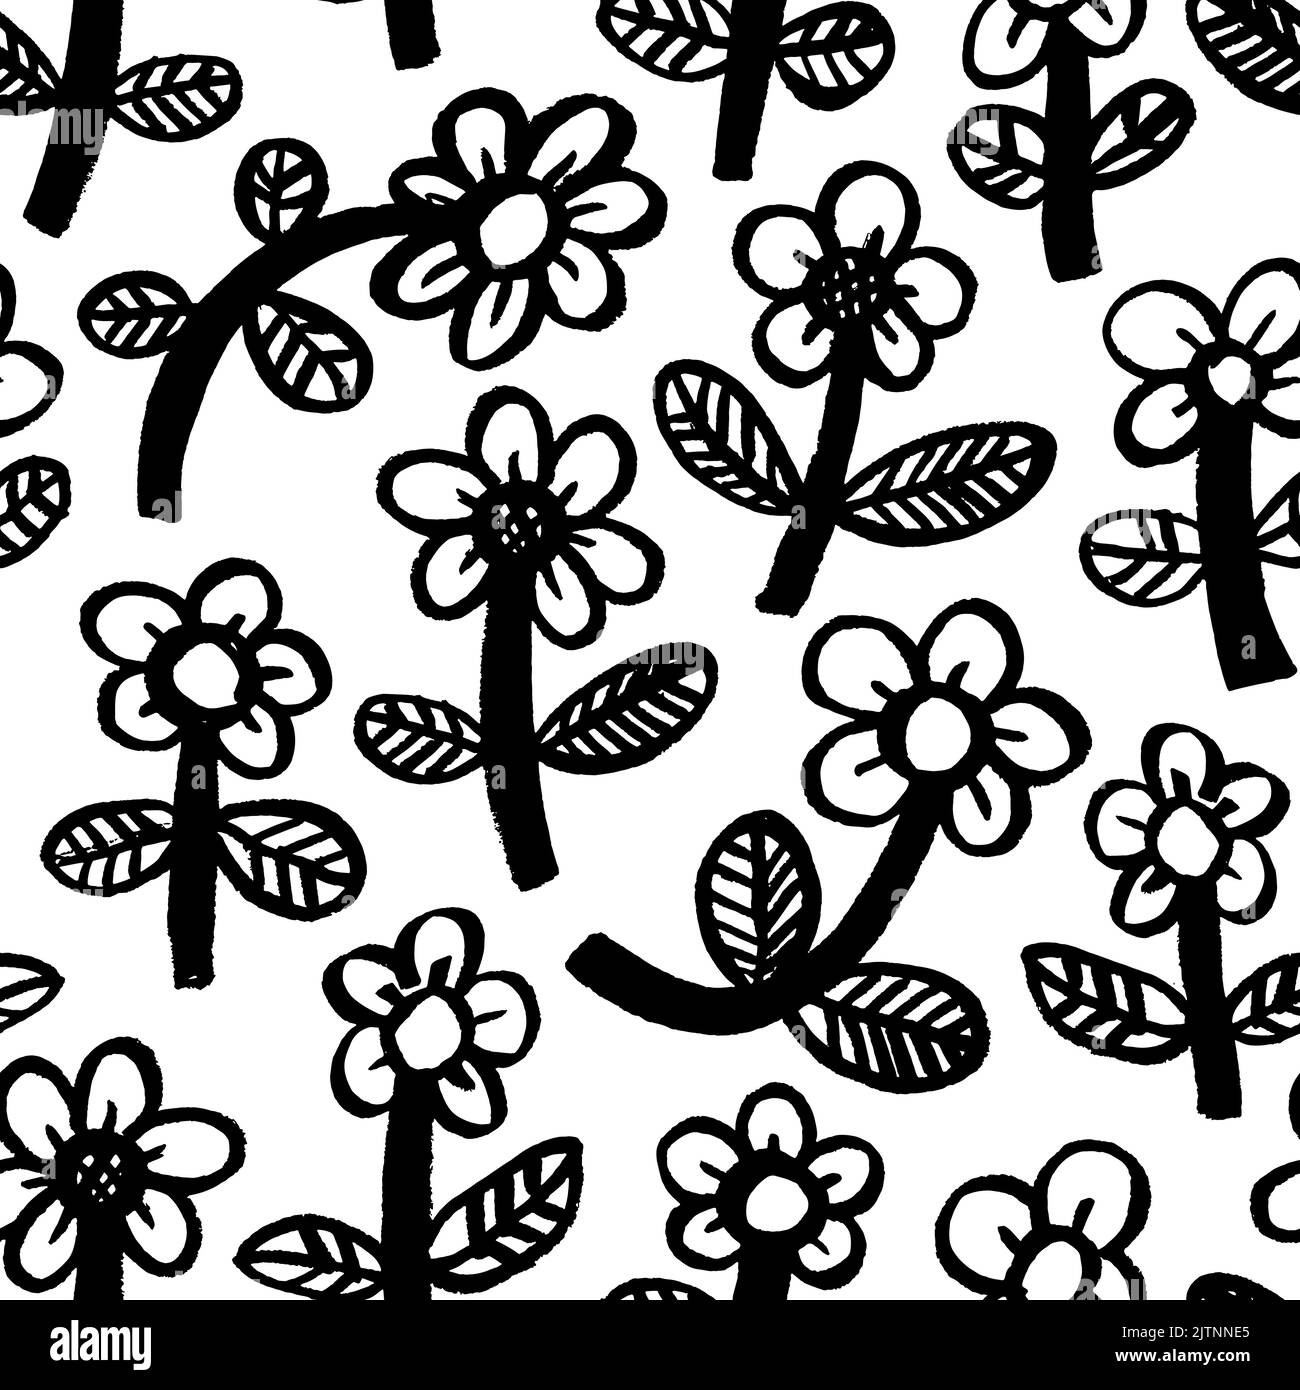 Bold floral print Black and White Stock Photos & Images - Alamy